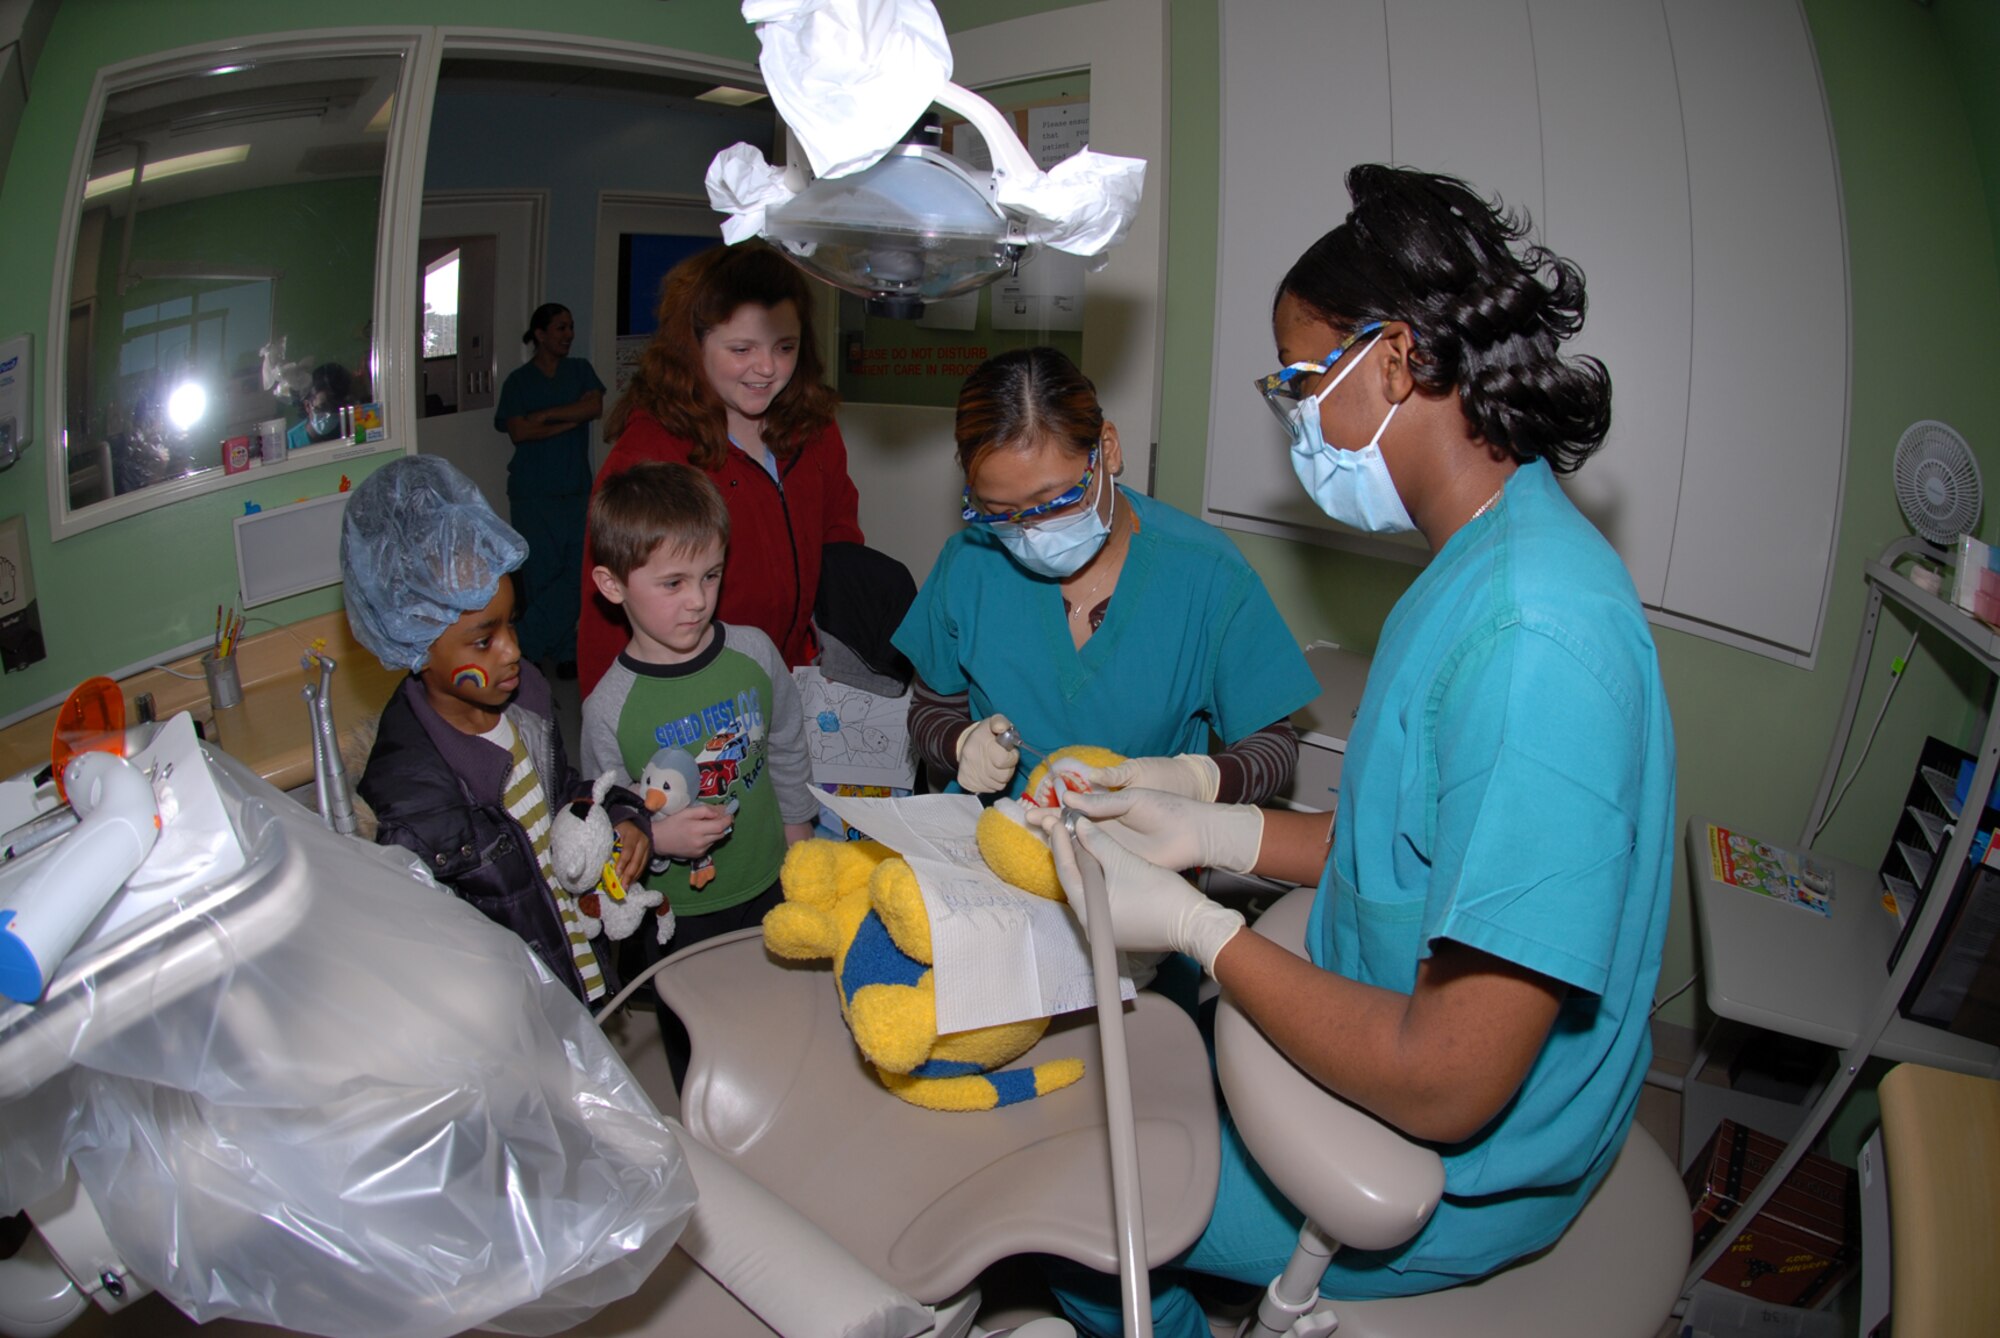 MISAWA AIR BASE, Japan -- Misawa children are given a chance to see how dental work is performed during the annual Teddy Bear Clinic here Mar. 1, 2008.  Children brought stuffed animals ranging from cats to penguins to the clinic which is designed to give children a better understanding of hospitals and to help curb their fears of them.  (U.S. Air Force photo by Senior Airman Laura R. McFarlane)